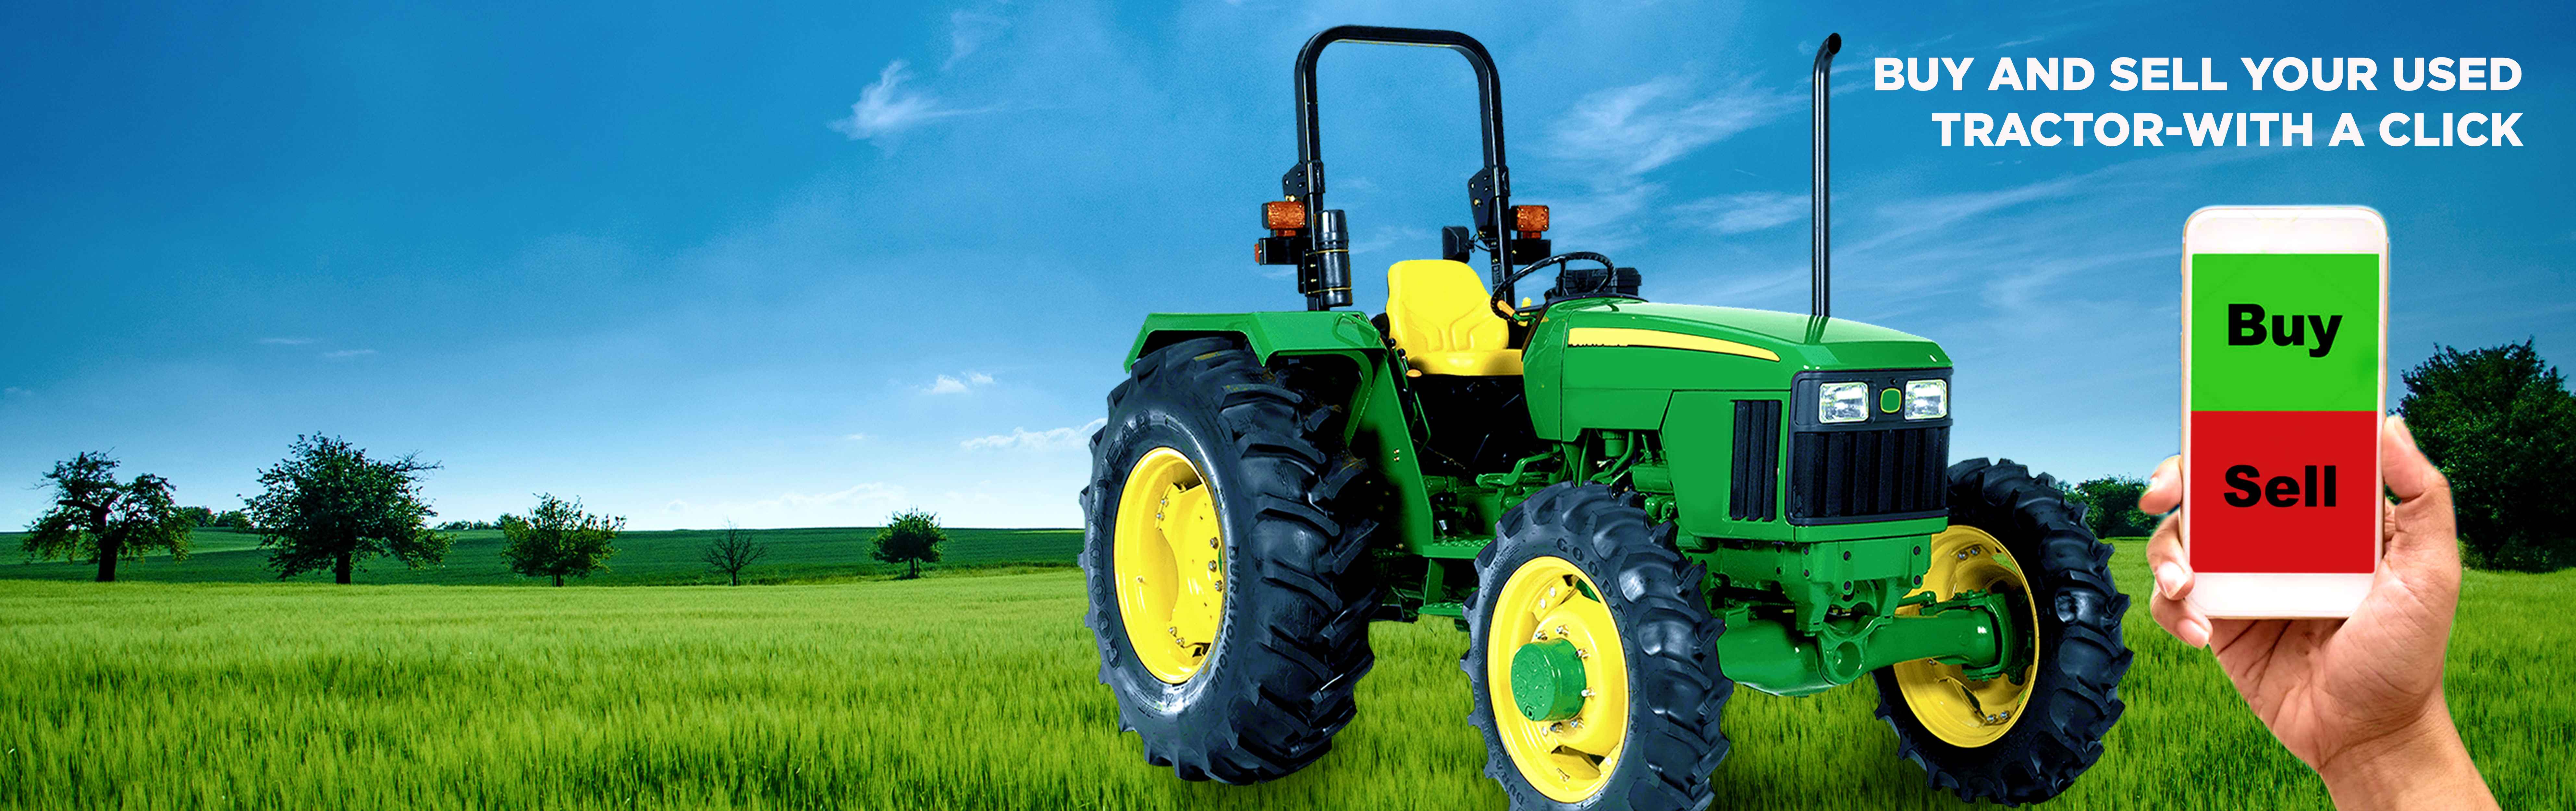 Buy And Sell your used tractors-with a click